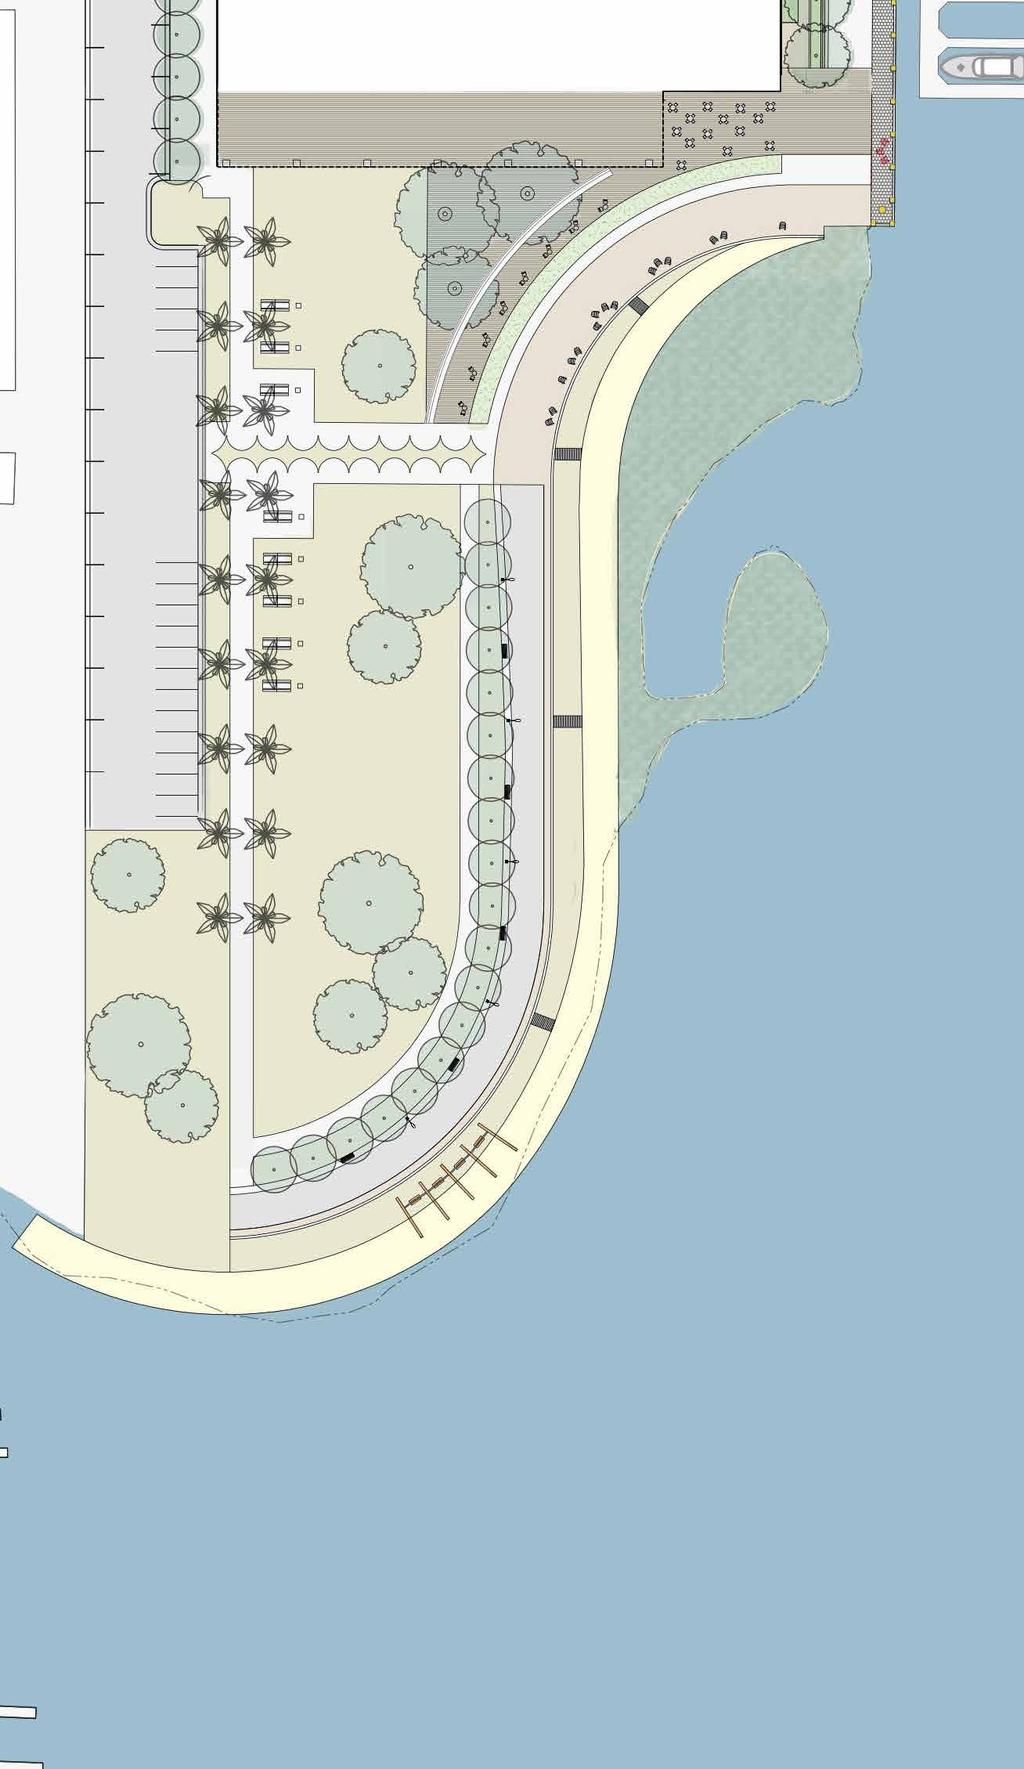 South Park will be a place of quiet and contempation within the overall family of parks in Brooklyn Basin.